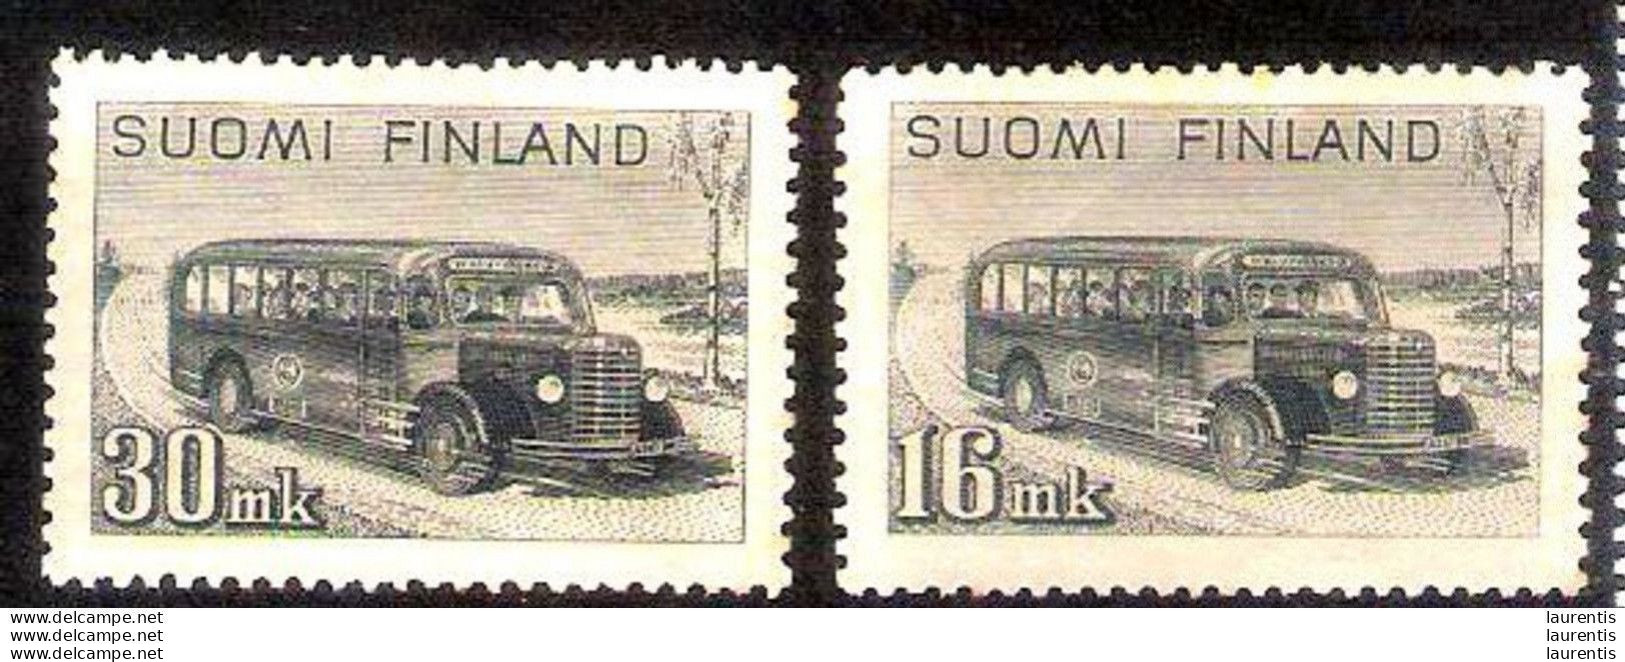 3174  Buses - Finland Yv 315-16 - Hinged - Lightly Toned Gum - 1,15 .(5) - Busses